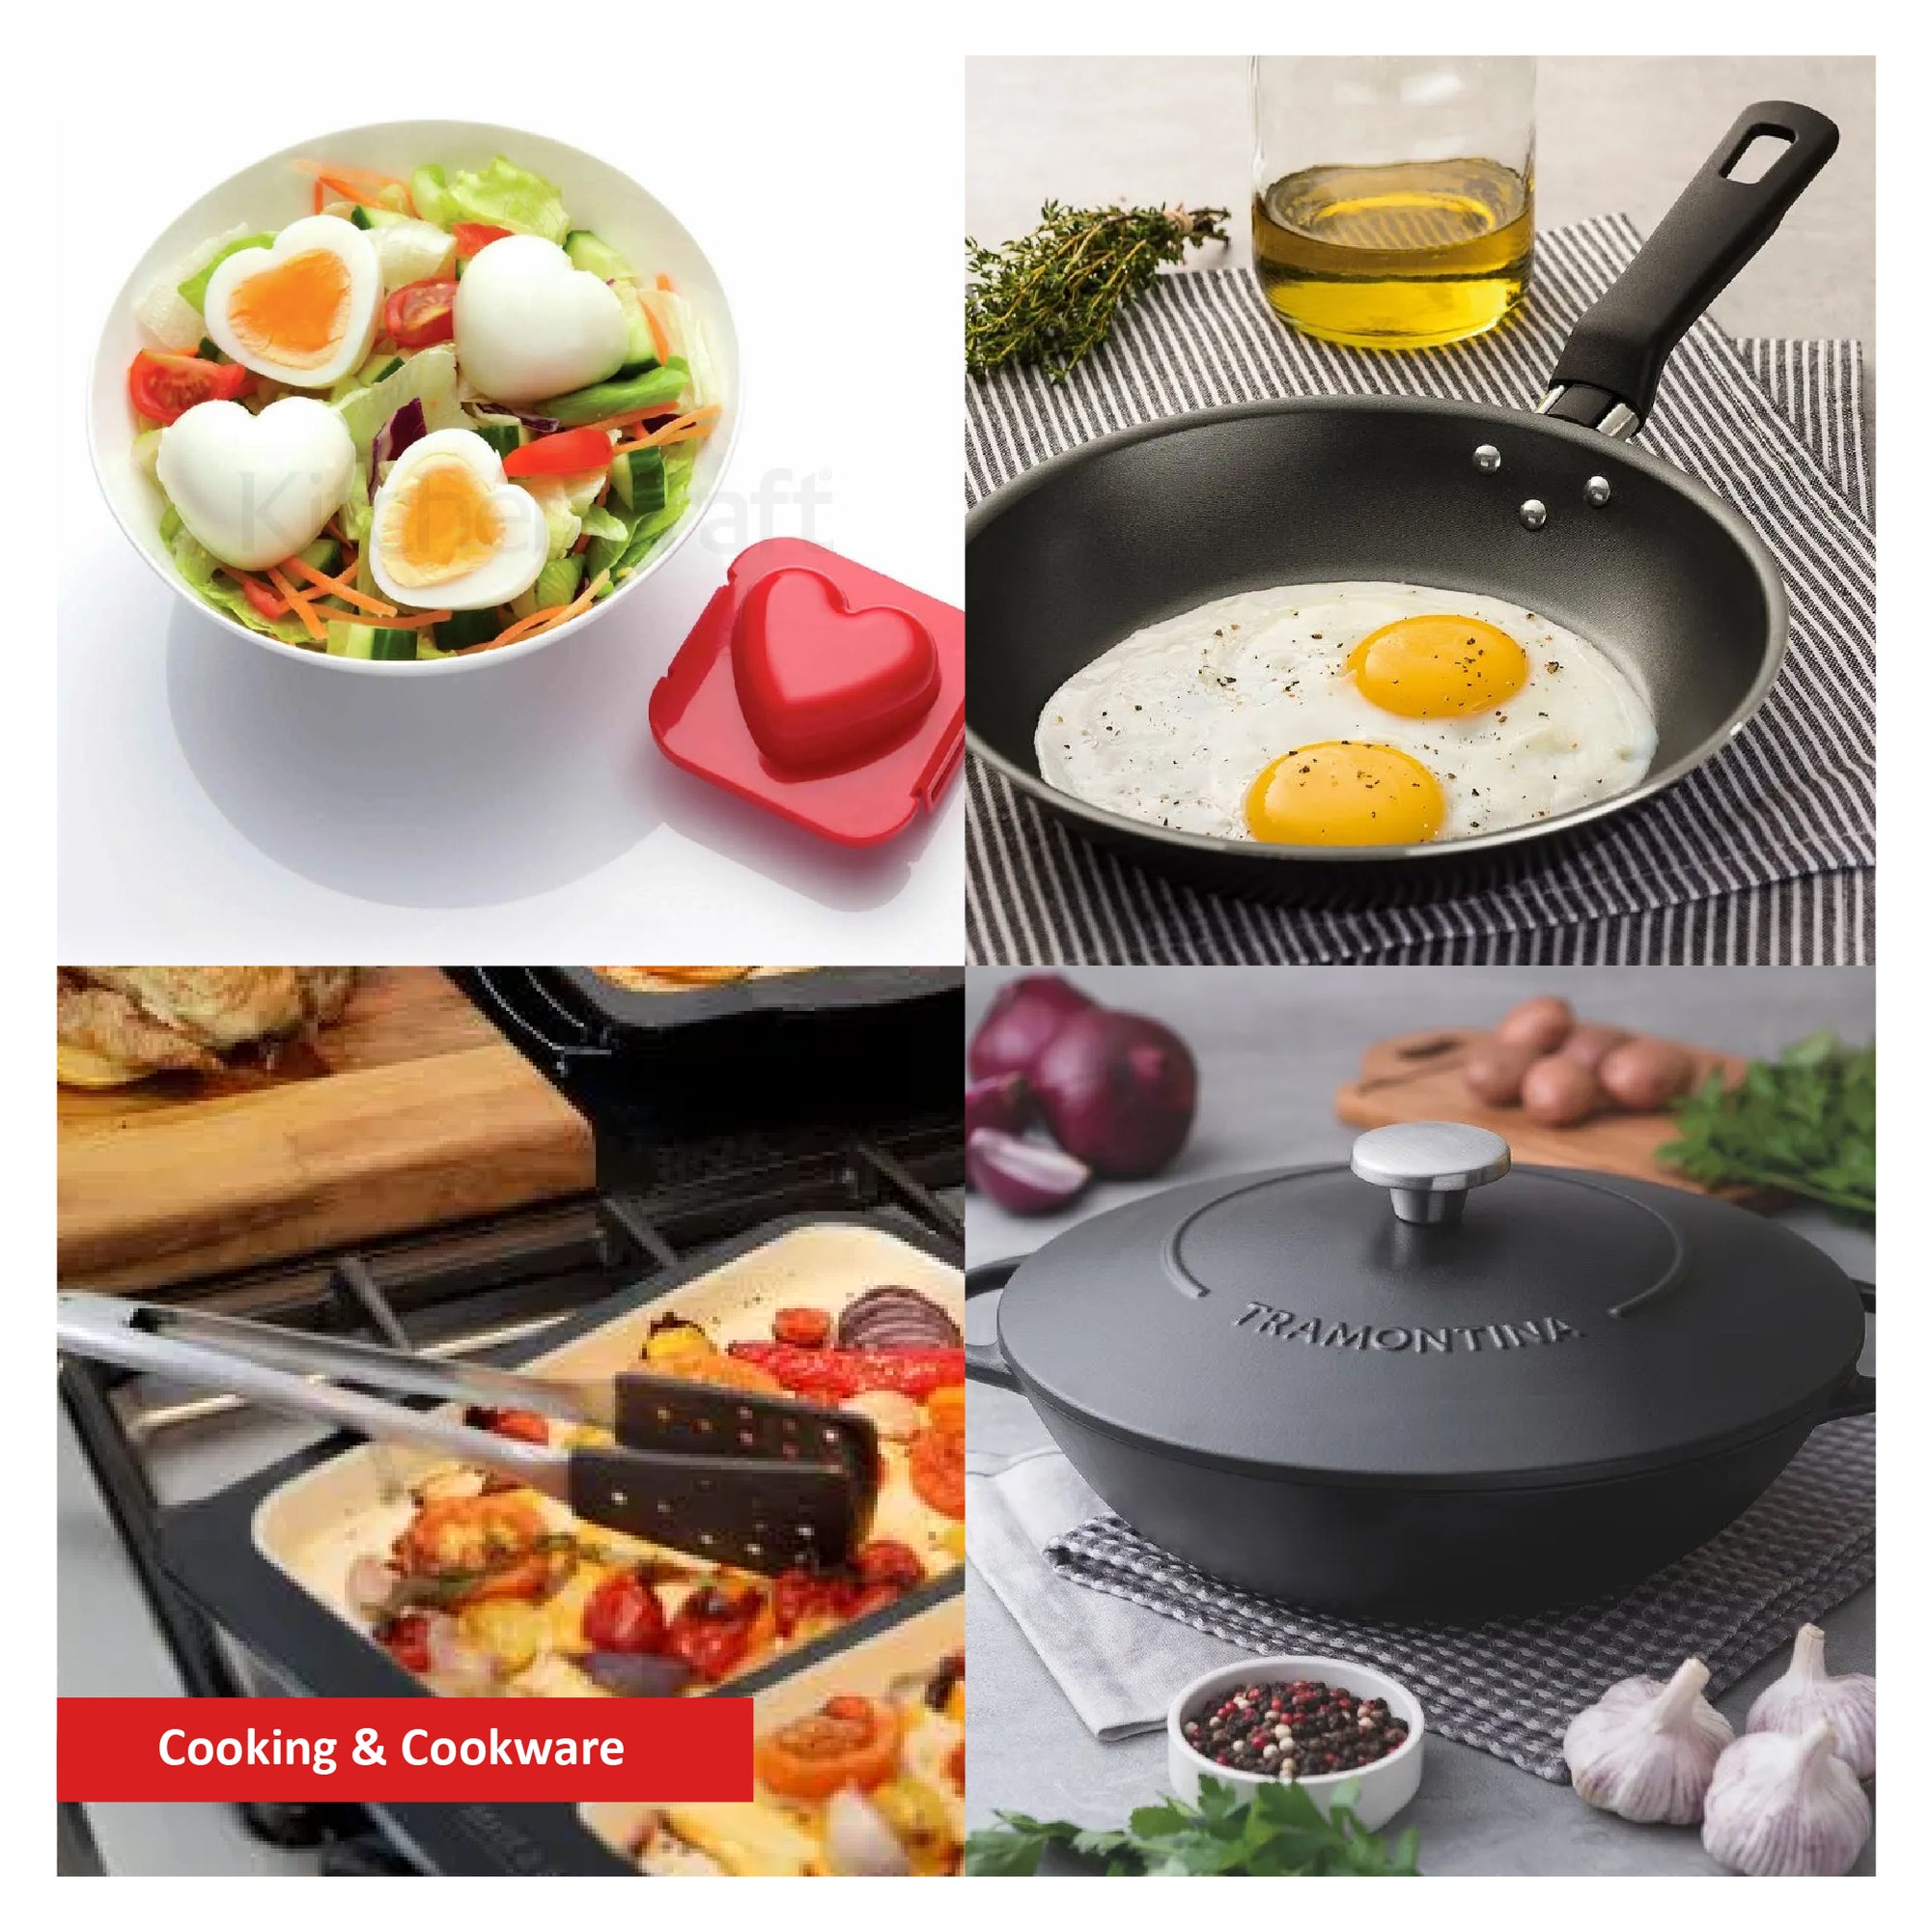 Cooking & Cookware